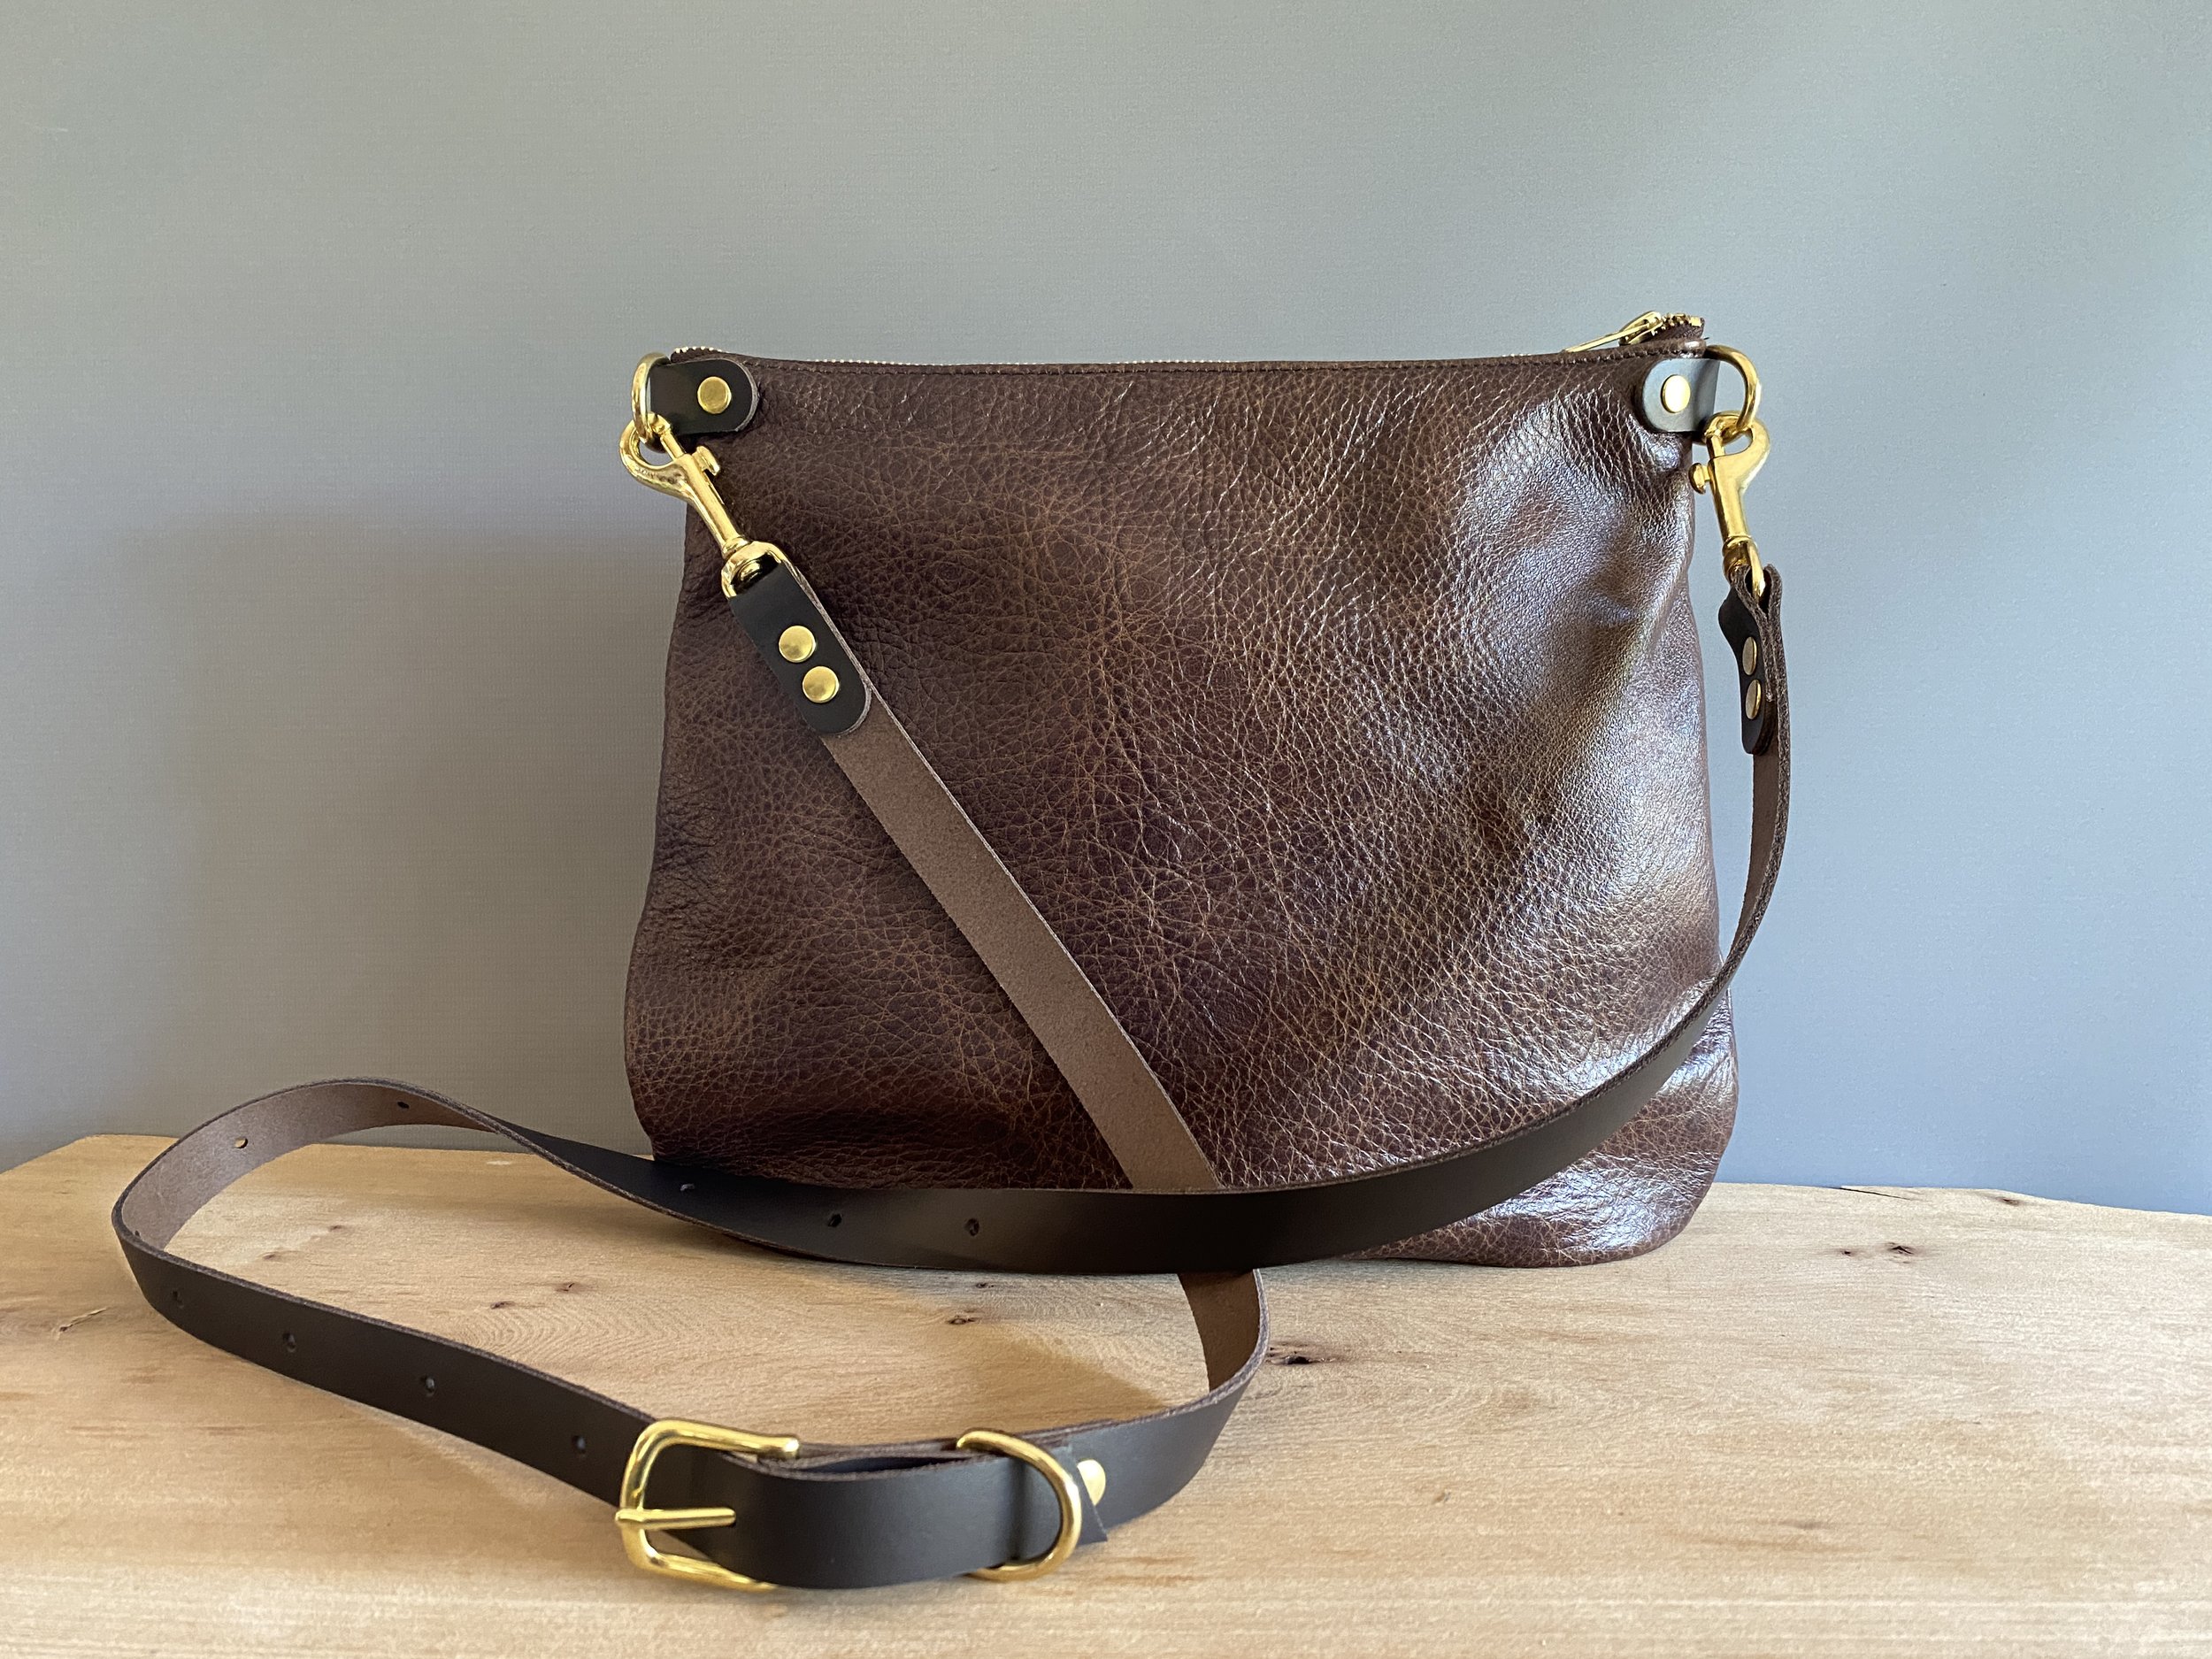 Waxed canvas handbags and leather bags, lovingly designed & crafted by ...